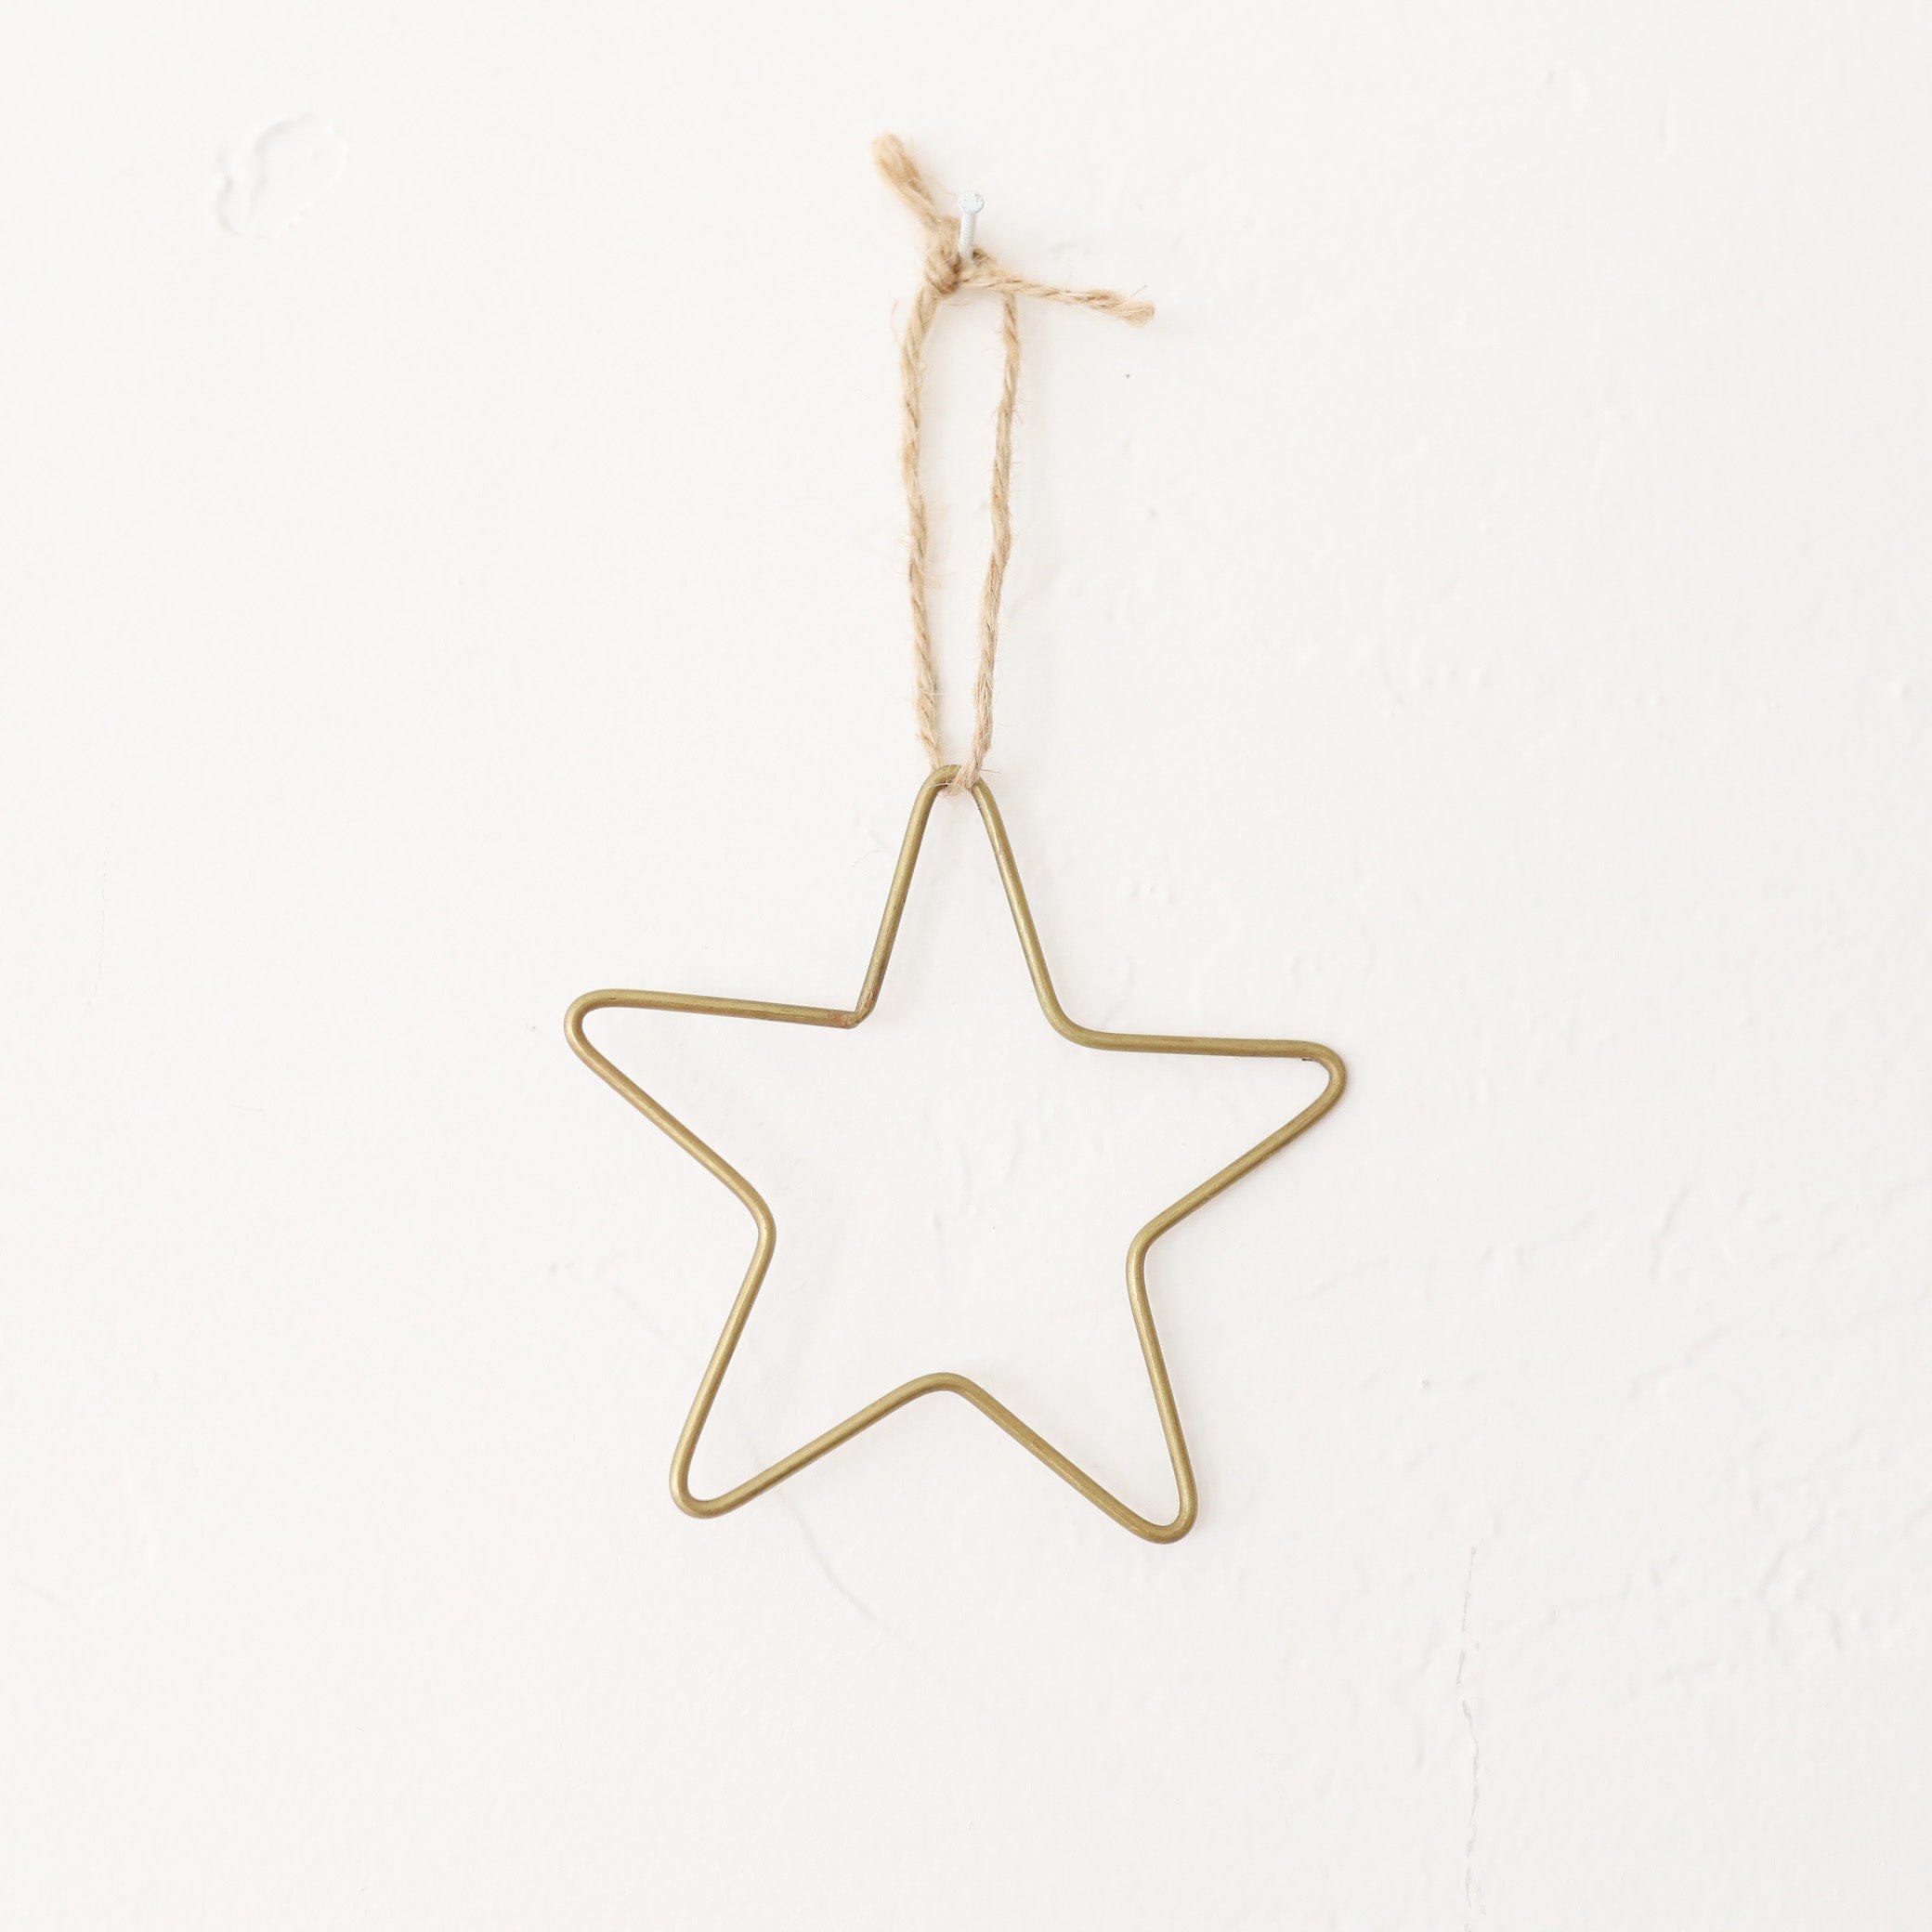 FOG LINEN Decor Large Star Brass Ornaments - Large Wire Star